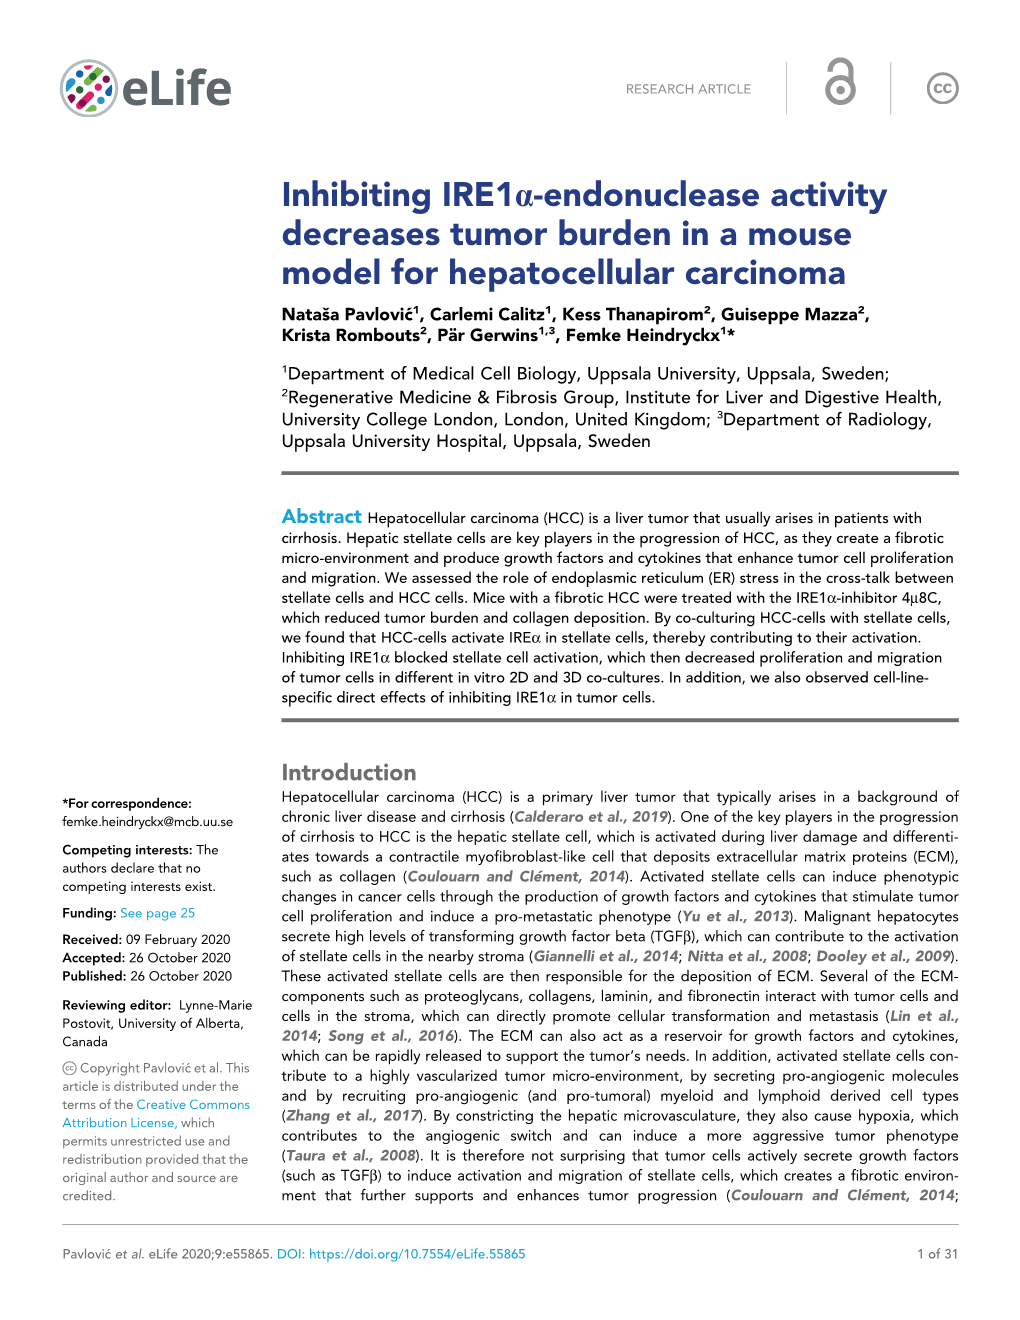 Inhibiting Ire1a-Endonuclease Activity Decreases Tumor Burden in A